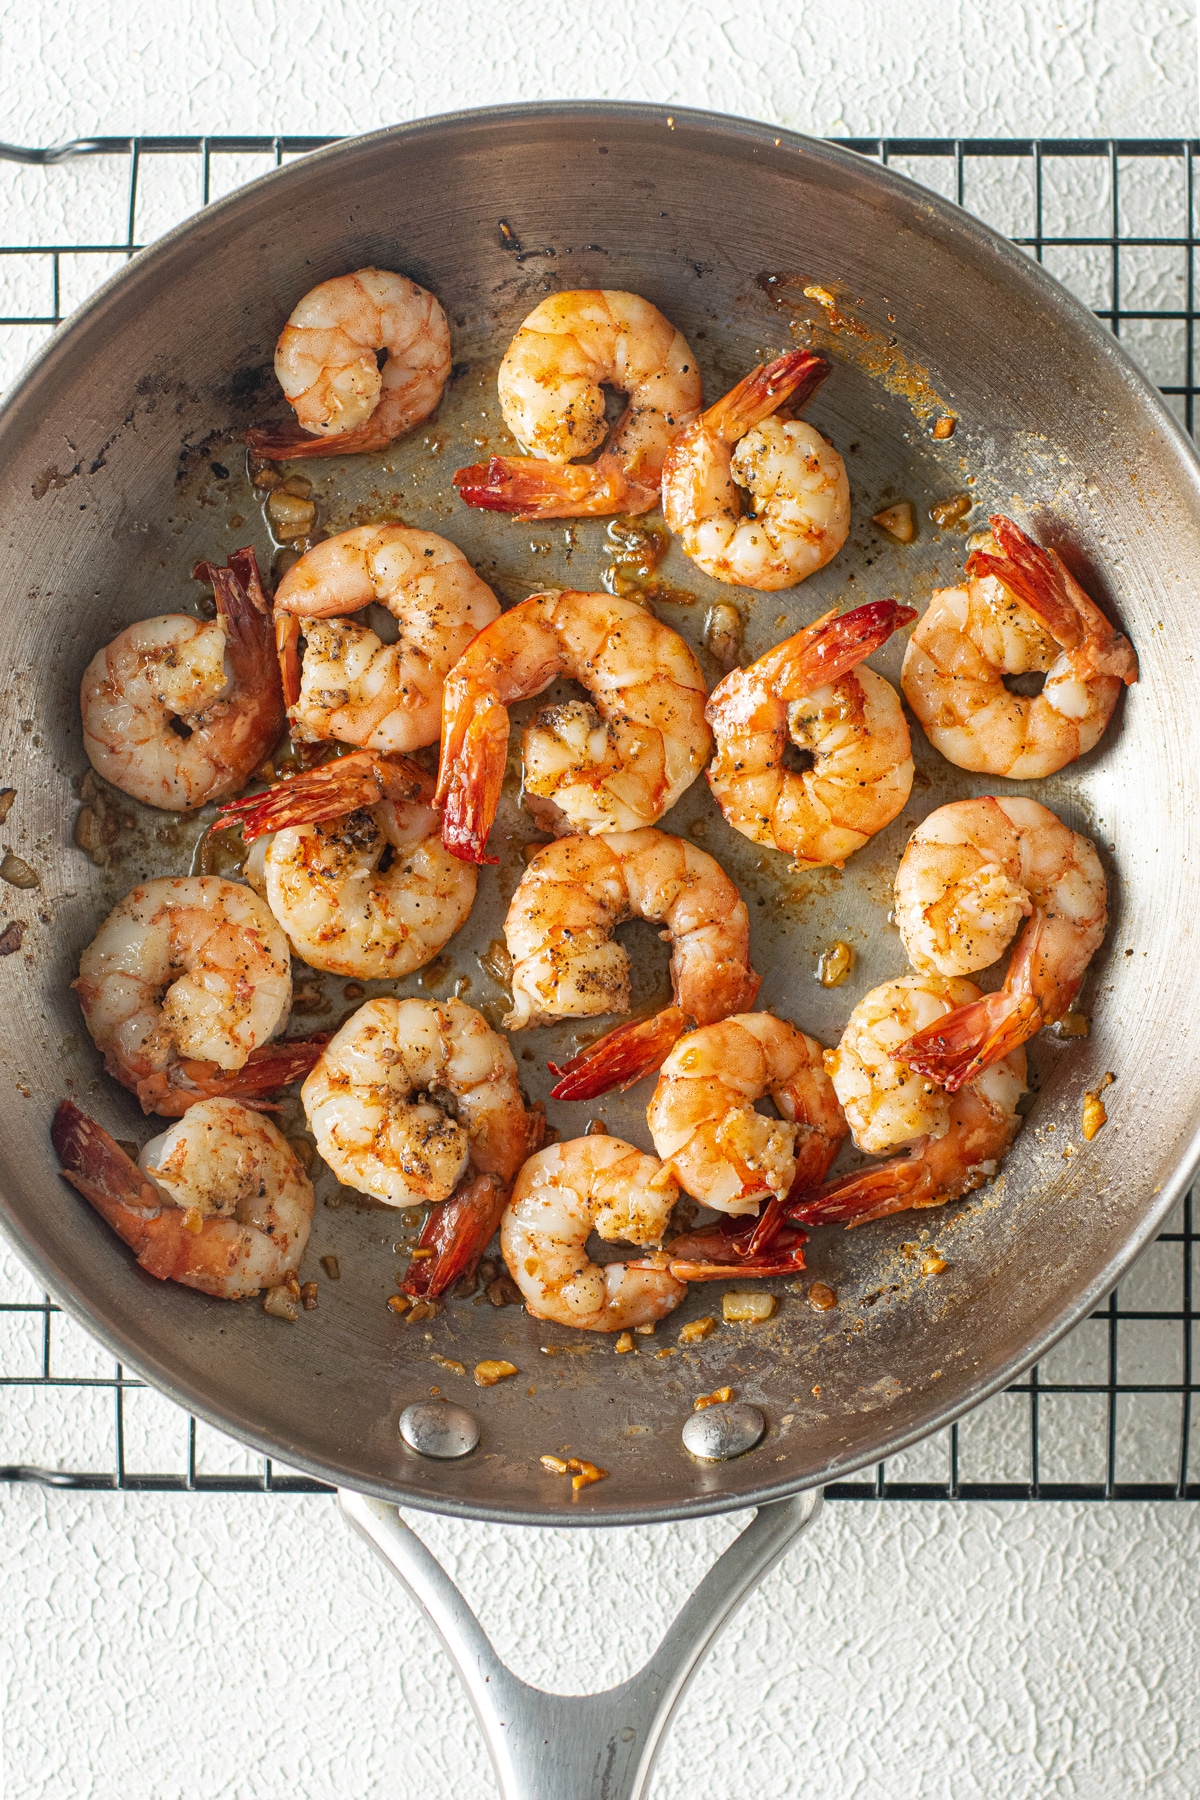 Another step in cooking Shrimp Scampi Recipe without Wine is to add the shrimps and wait for it to turn red.